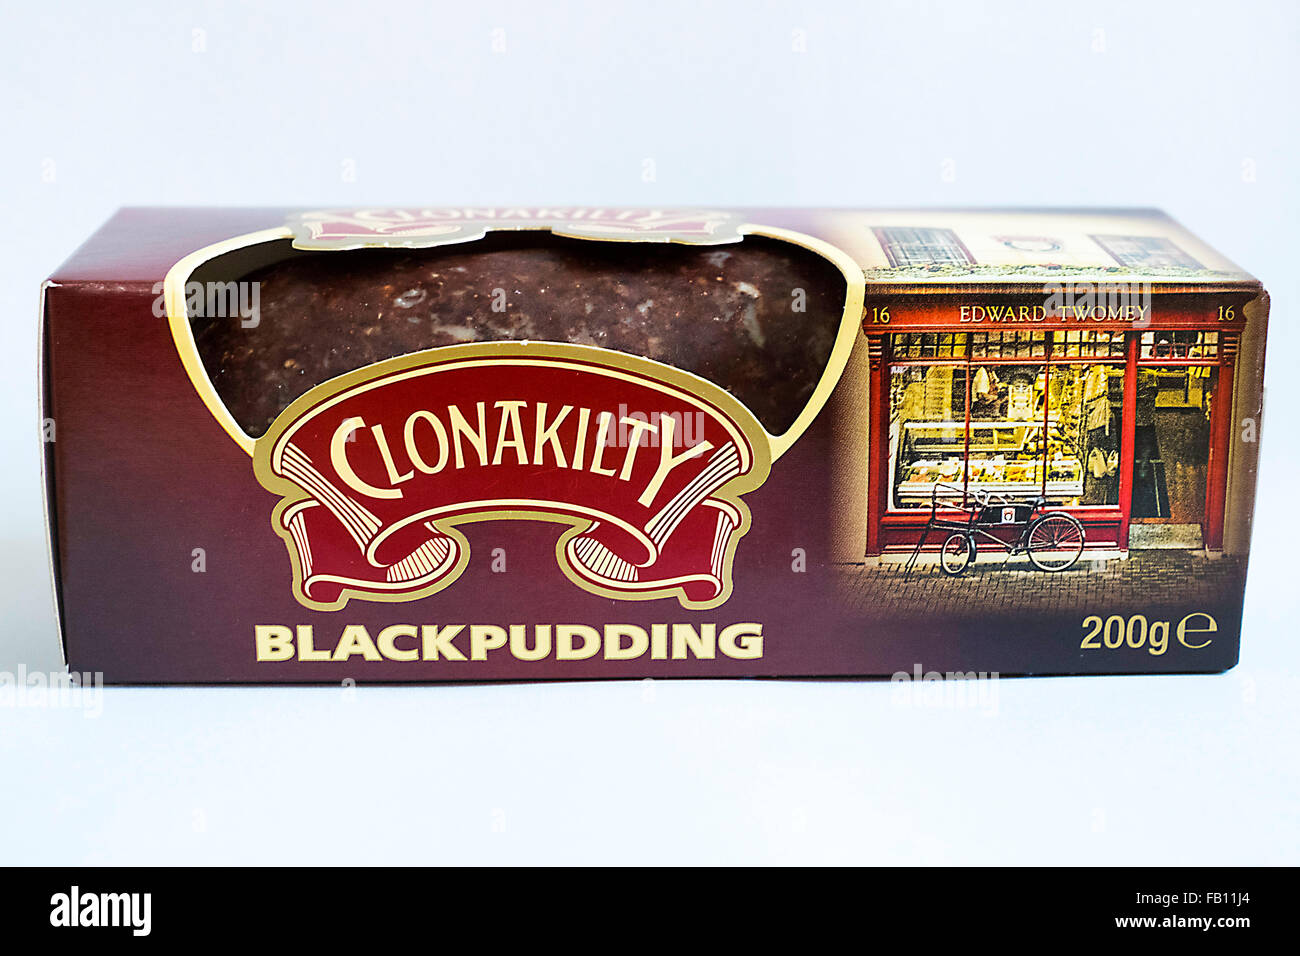 A packet of Clonakilty Black Pudding sausage Stock Photo - Alamy